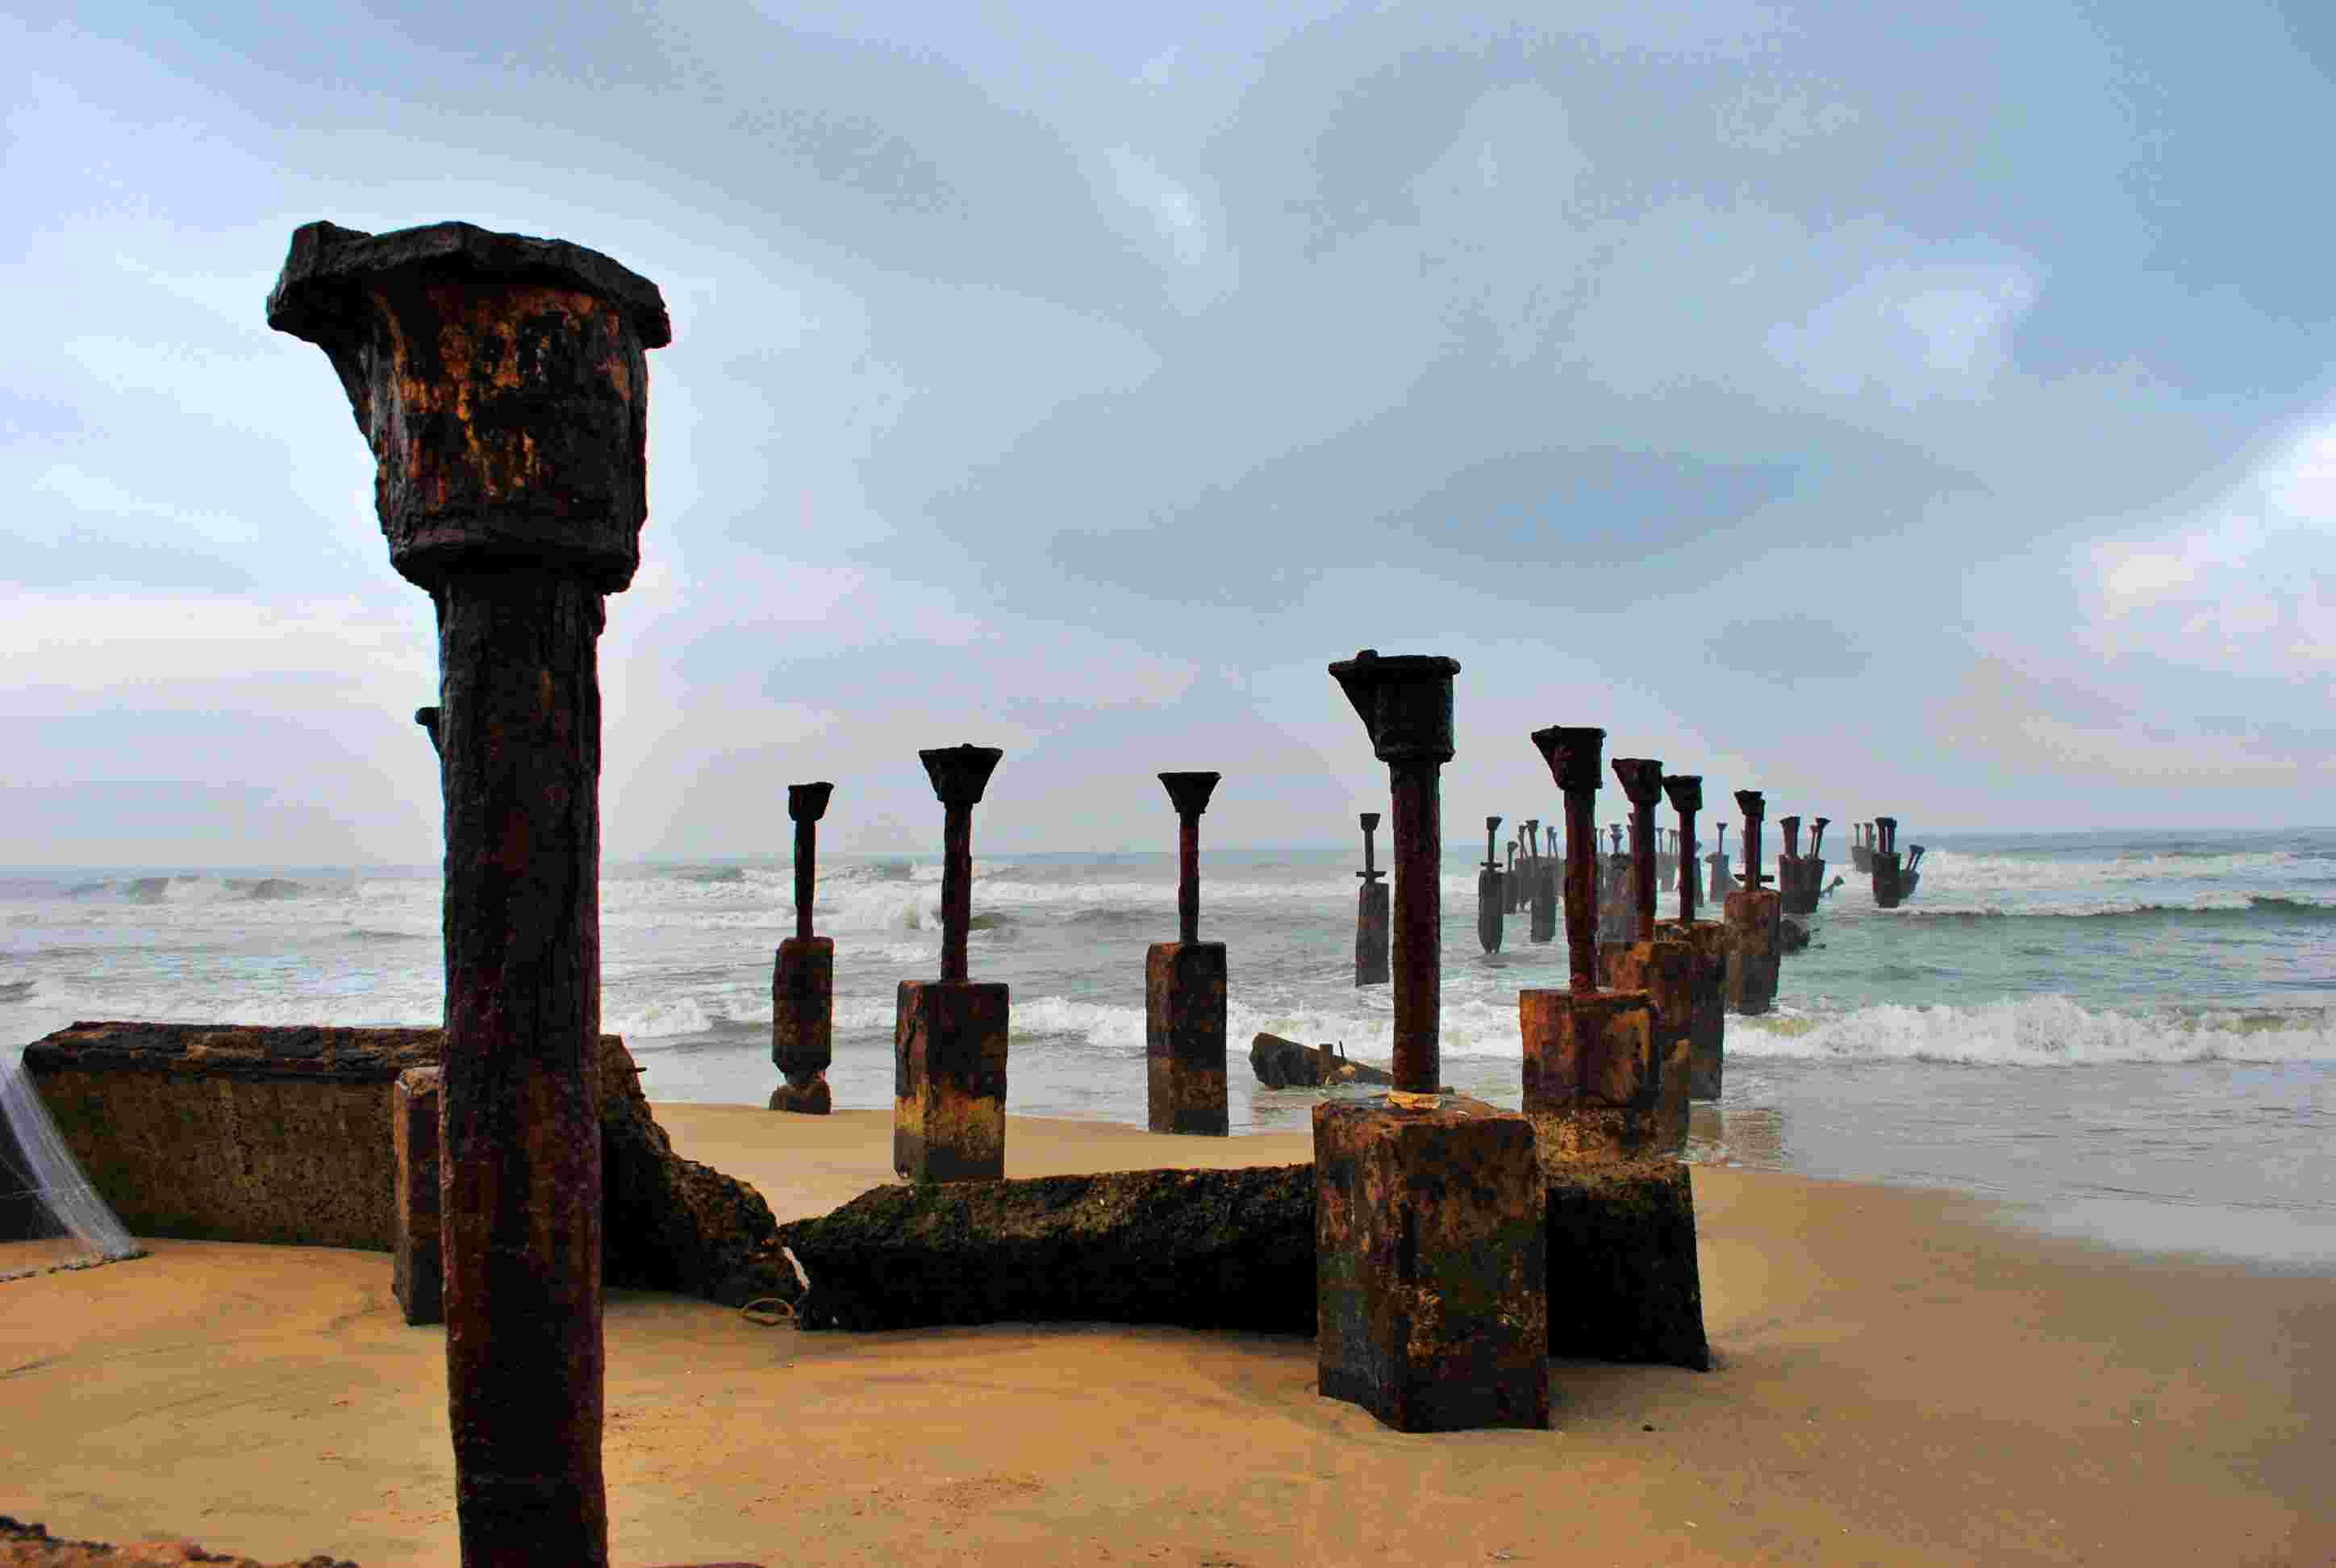 Calicut Pier – the place that once bustled with port trade